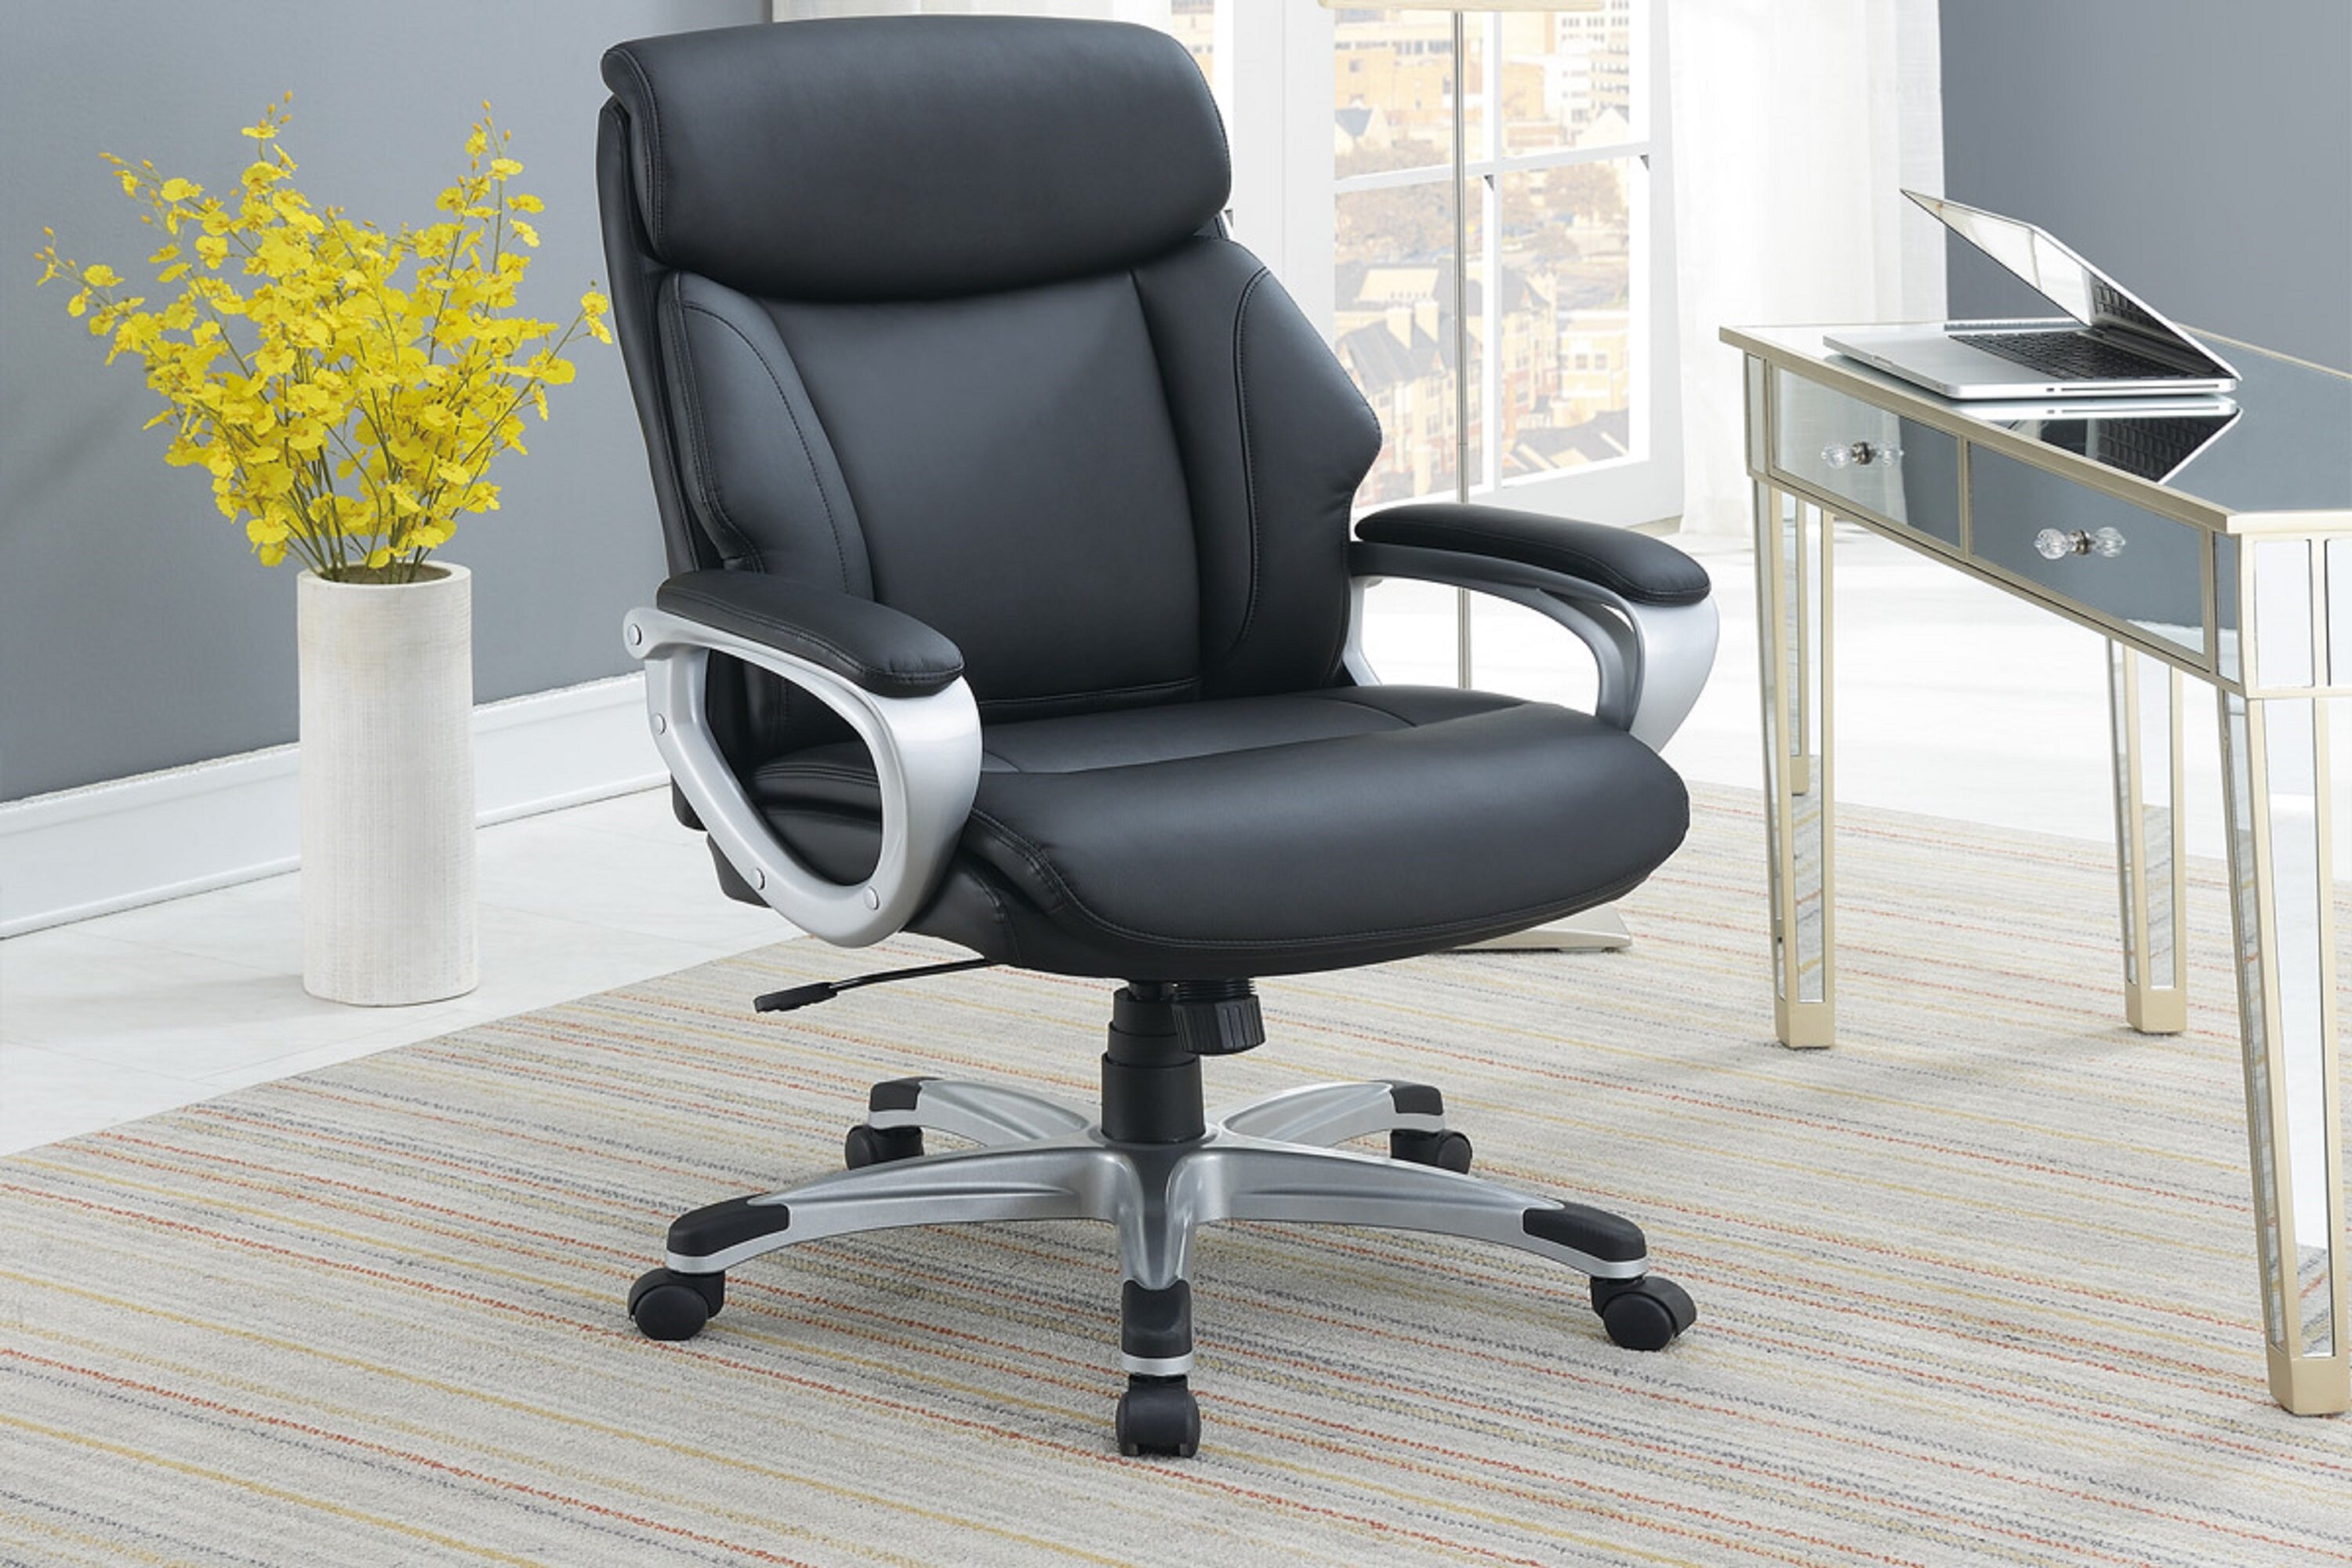 Details about   Ergonomic Mesh Midback Chair Computer Task Heavy Duty Adjustable Home Office 